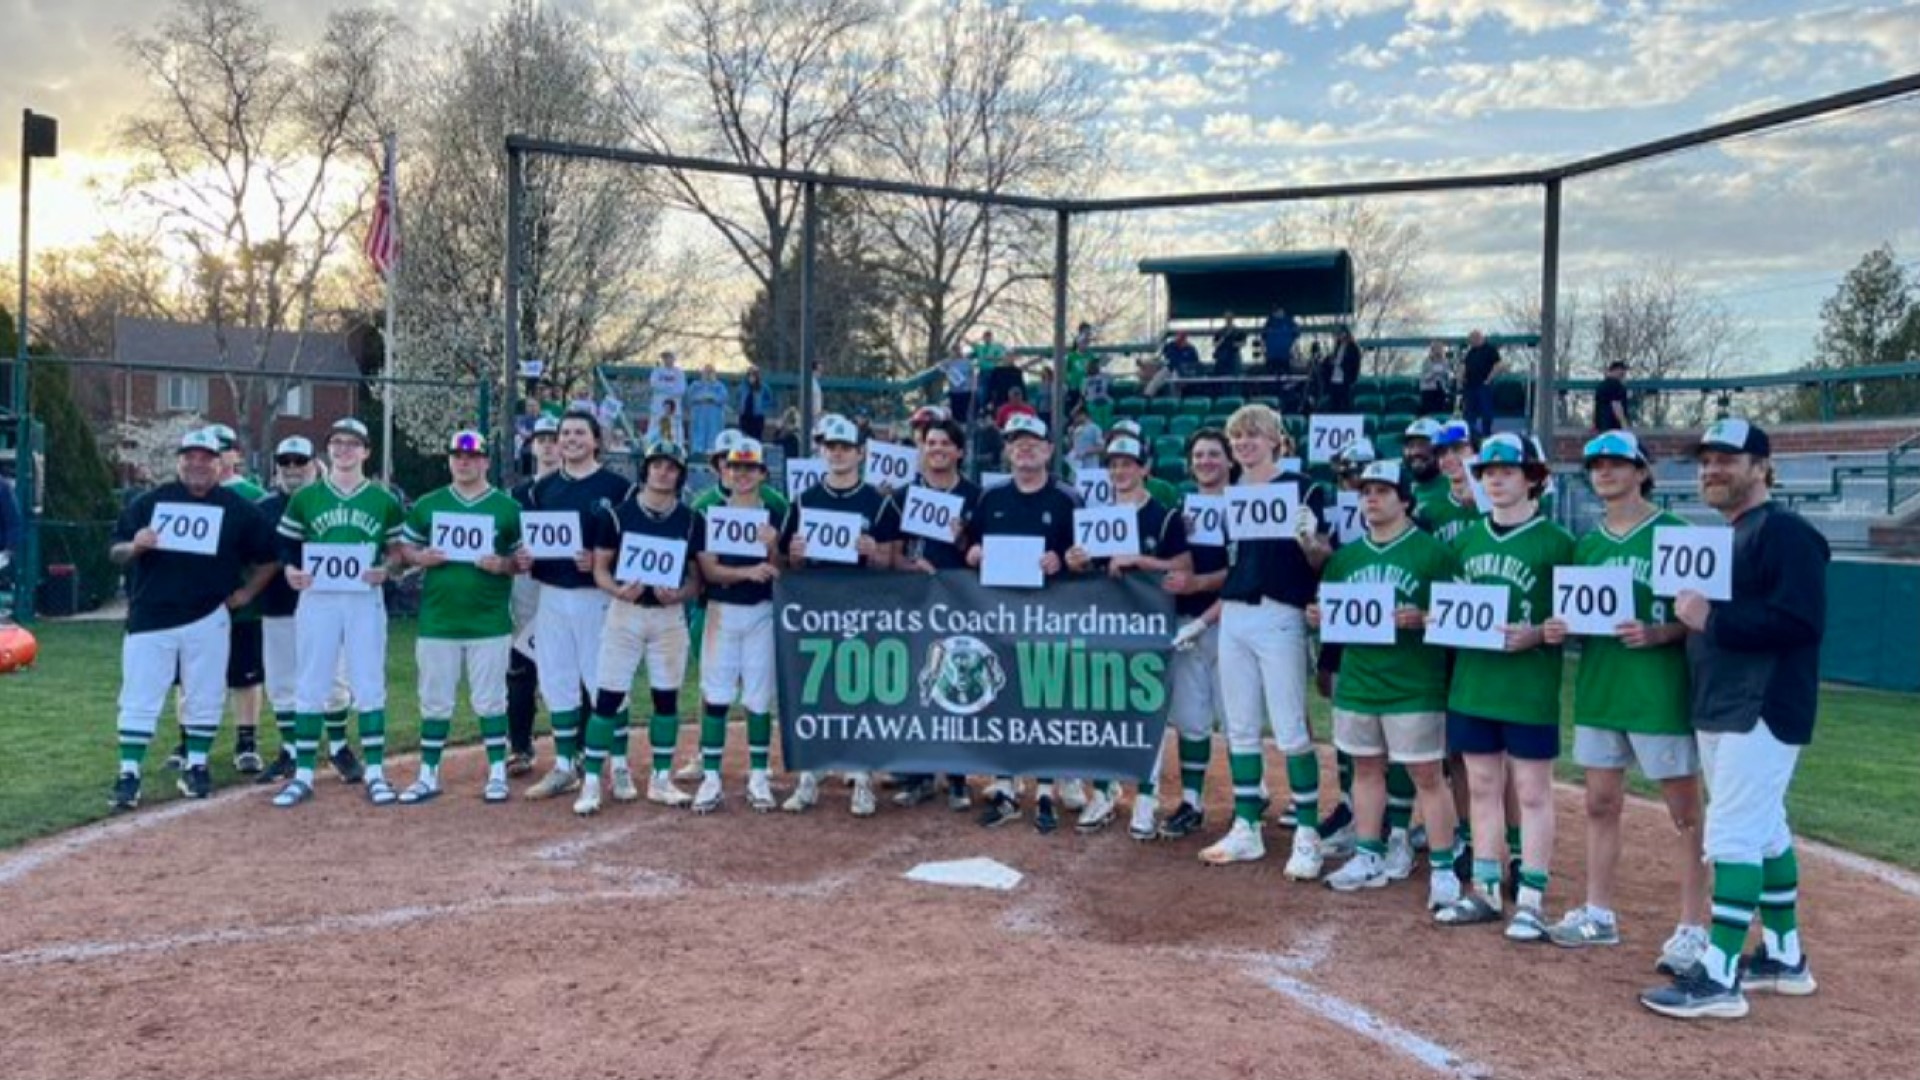 Hardman becomes the 13th high school baseball coach in Ohio to reach that milestone, according to the OHSAA. Ottawa Hills defeated Whiteford on Tuesday, 2-1.